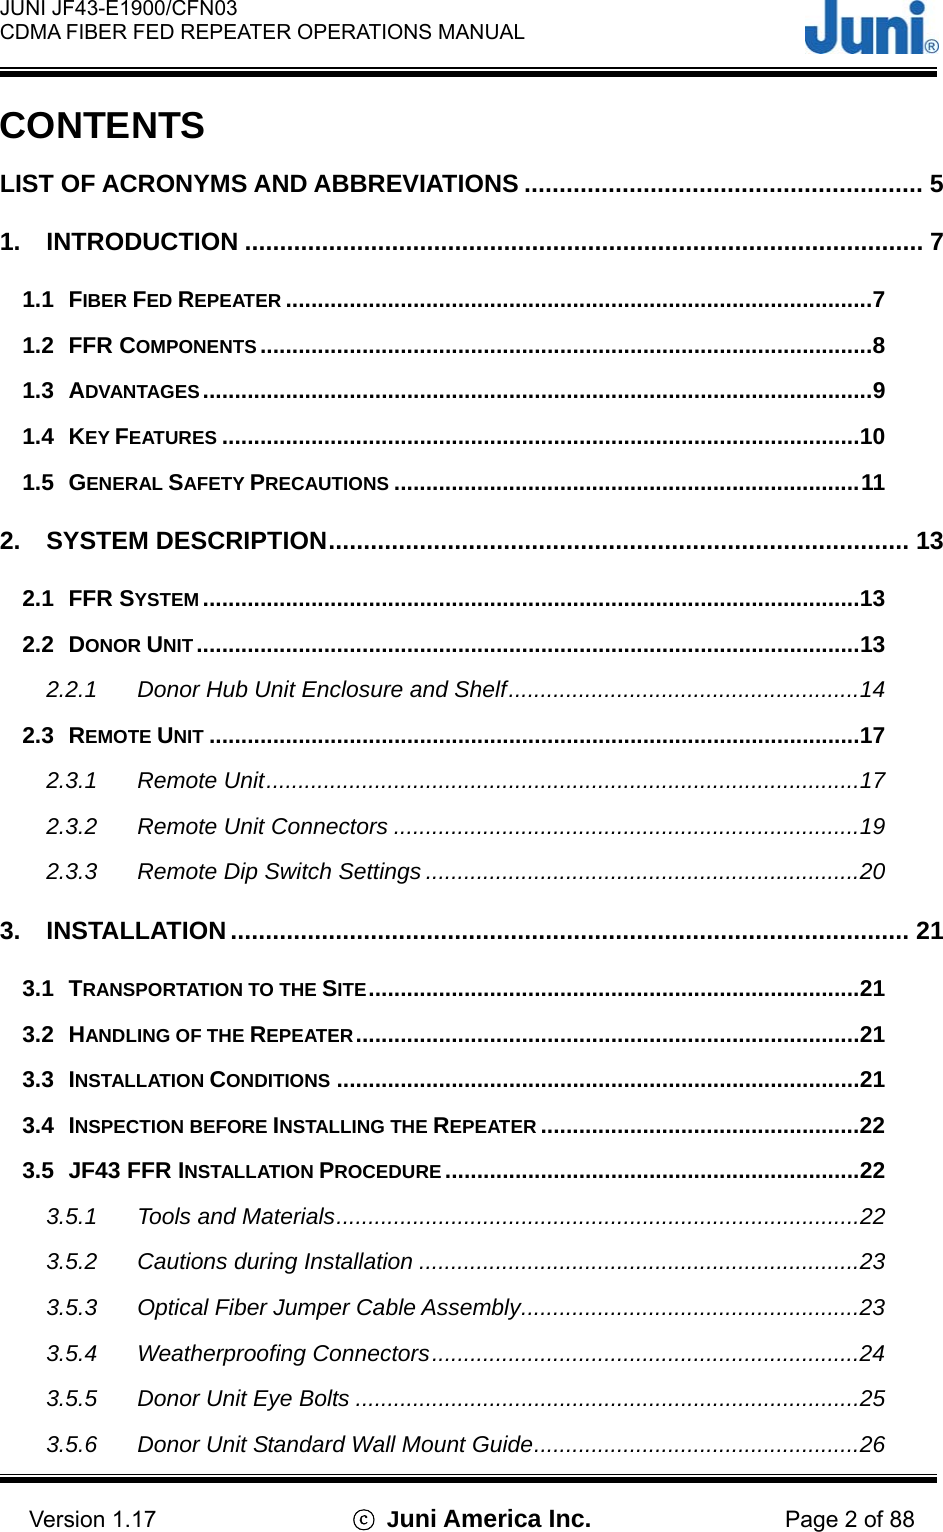  JUNI JF43-E1900/CFN03 CDMA FIBER FED REPEATER OPERATIONS MANUAL                                    Version 1.17  ⓒ Juni America Inc. Page 2 of 88 CONTENTS LIST OF ACRONYMS AND ABBREVIATIONS ......................................................... 5 1. INTRODUCTION ................................................................................................. 7 1.1 FIBER FED REPEATER ............................................................................................7 1.2 FFR COMPONENTS ................................................................................................8 1.3 ADVANTAGES.........................................................................................................9 1.4 KEY FEATURES ....................................................................................................10 1.5 GENERAL SAFETY PRECAUTIONS .........................................................................11 2. SYSTEM DESCRIPTION................................................................................... 13 2.1 FFR SYSTEM .......................................................................................................13 2.2 DONOR UNIT ........................................................................................................13 2.2.1 Donor Hub Unit Enclosure and Shelf.......................................................14 2.3 REMOTE UNIT ......................................................................................................17 2.3.1 Remote Unit.............................................................................................17 2.3.2 Remote Unit Connectors .........................................................................19 2.3.3 Remote Dip Switch Settings ....................................................................20 3. INSTALLATION ................................................................................................. 21 3.1 TRANSPORTATION TO THE SITE.............................................................................21 3.2 HANDLING OF THE REPEATER...............................................................................21 3.3 INSTALLATION CONDITIONS ..................................................................................21 3.4 INSPECTION BEFORE INSTALLING THE REPEATER ..................................................22 3.5 JF43 FFR INSTALLATION PROCEDURE .................................................................22 3.5.1 Tools and Materials..................................................................................22 3.5.2 Cautions during Installation .....................................................................23 3.5.3 Optical Fiber Jumper Cable Assembly.....................................................23 3.5.4 Weatherproofing Connectors...................................................................24 3.5.5 Donor Unit Eye Bolts ...............................................................................25 3.5.6 Donor Unit Standard Wall Mount Guide...................................................26 